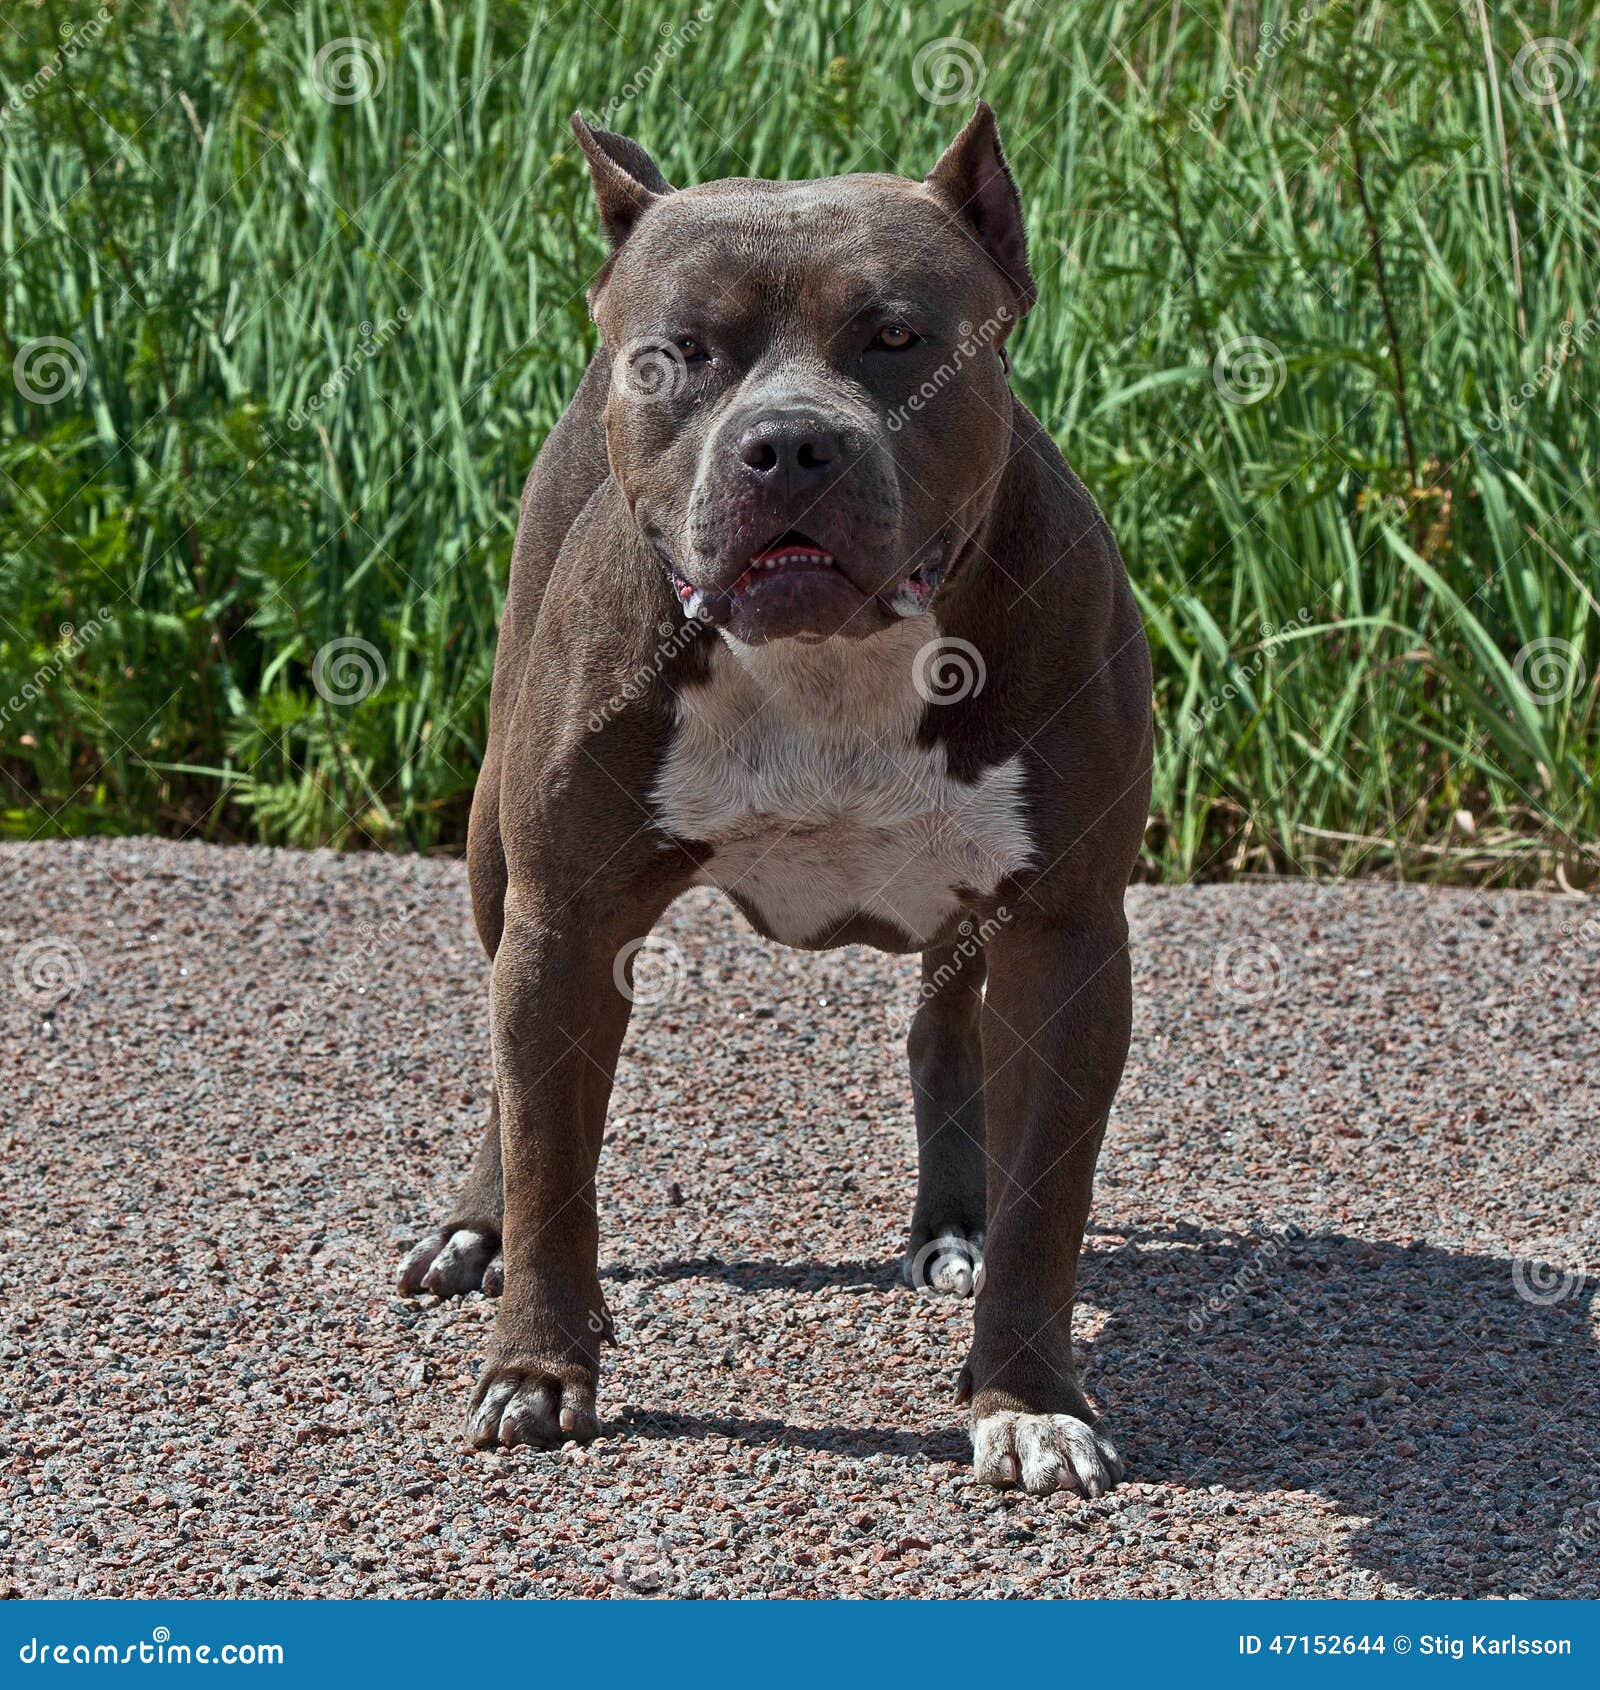 American Pitbull Terrier Male Stock Photo Image of dogs